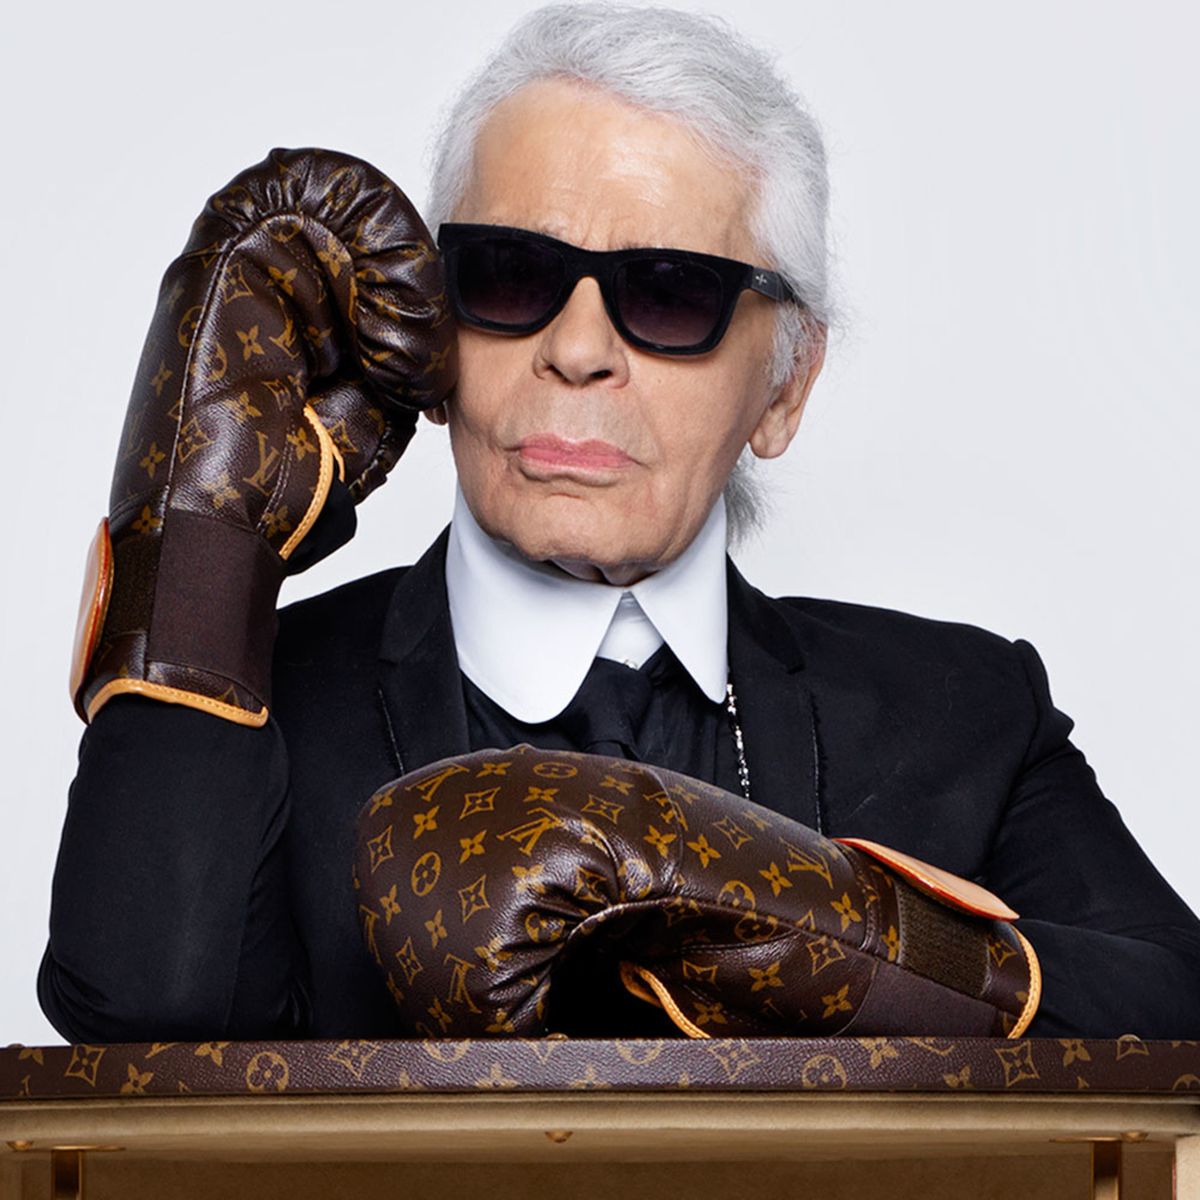 Karl Lagerfeld and Christian Louboutin for Louis Vuitton? - my